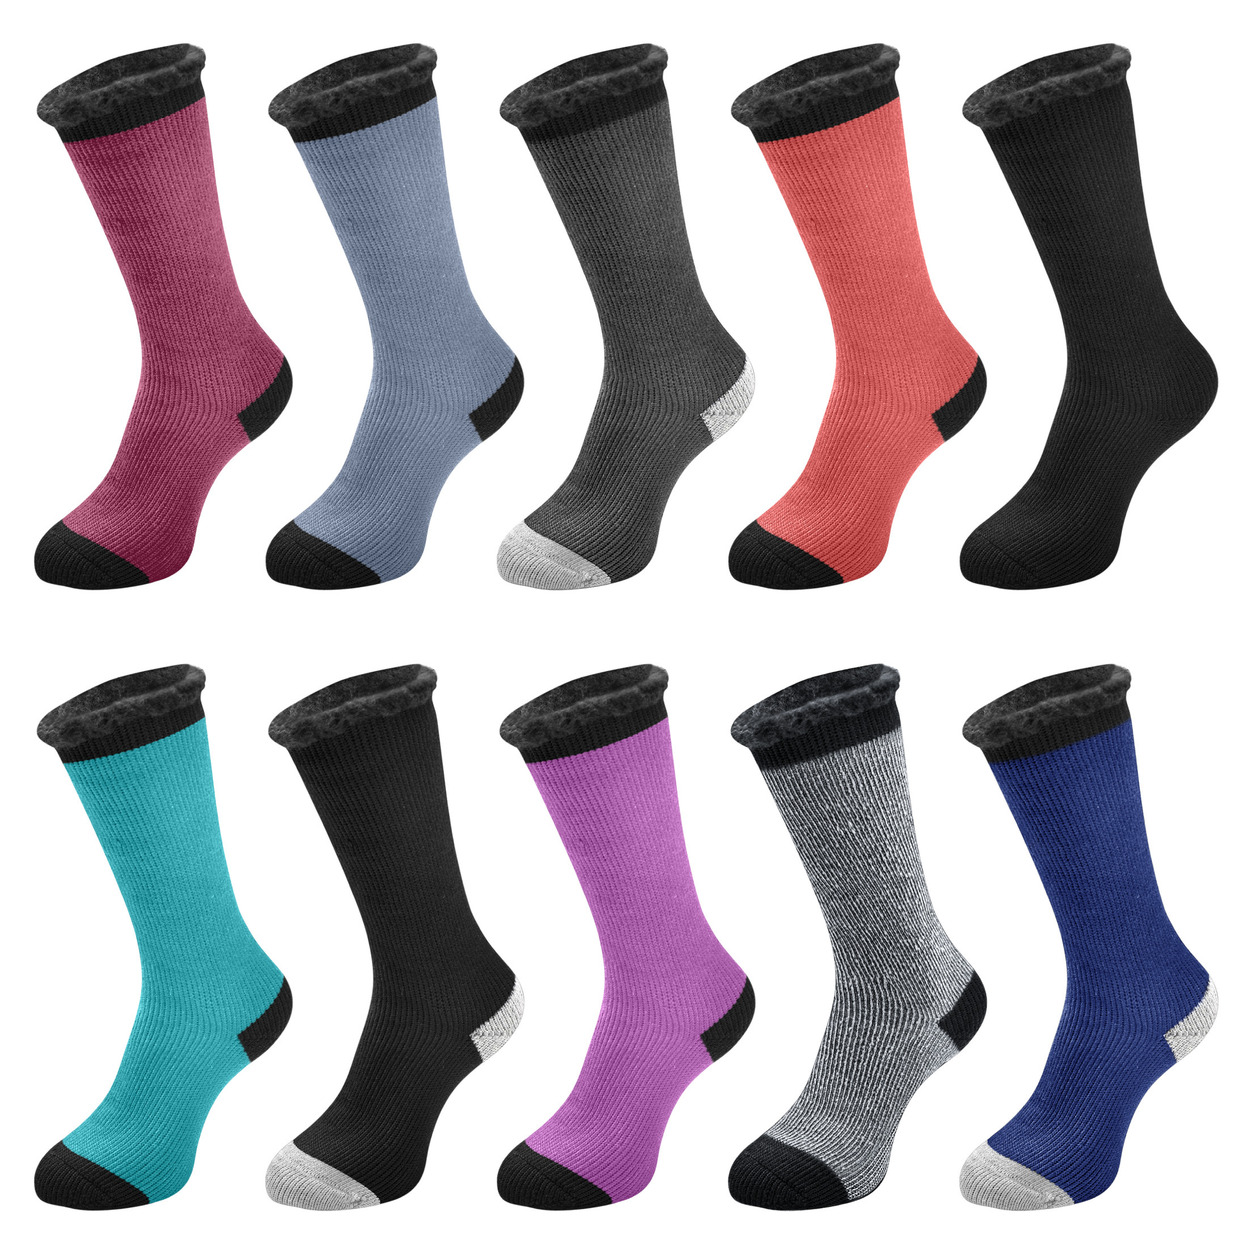 5-Pairs: Men's Thermal-Insulated Brushed Lined Warm Heated Winter Socks For Cold Weather